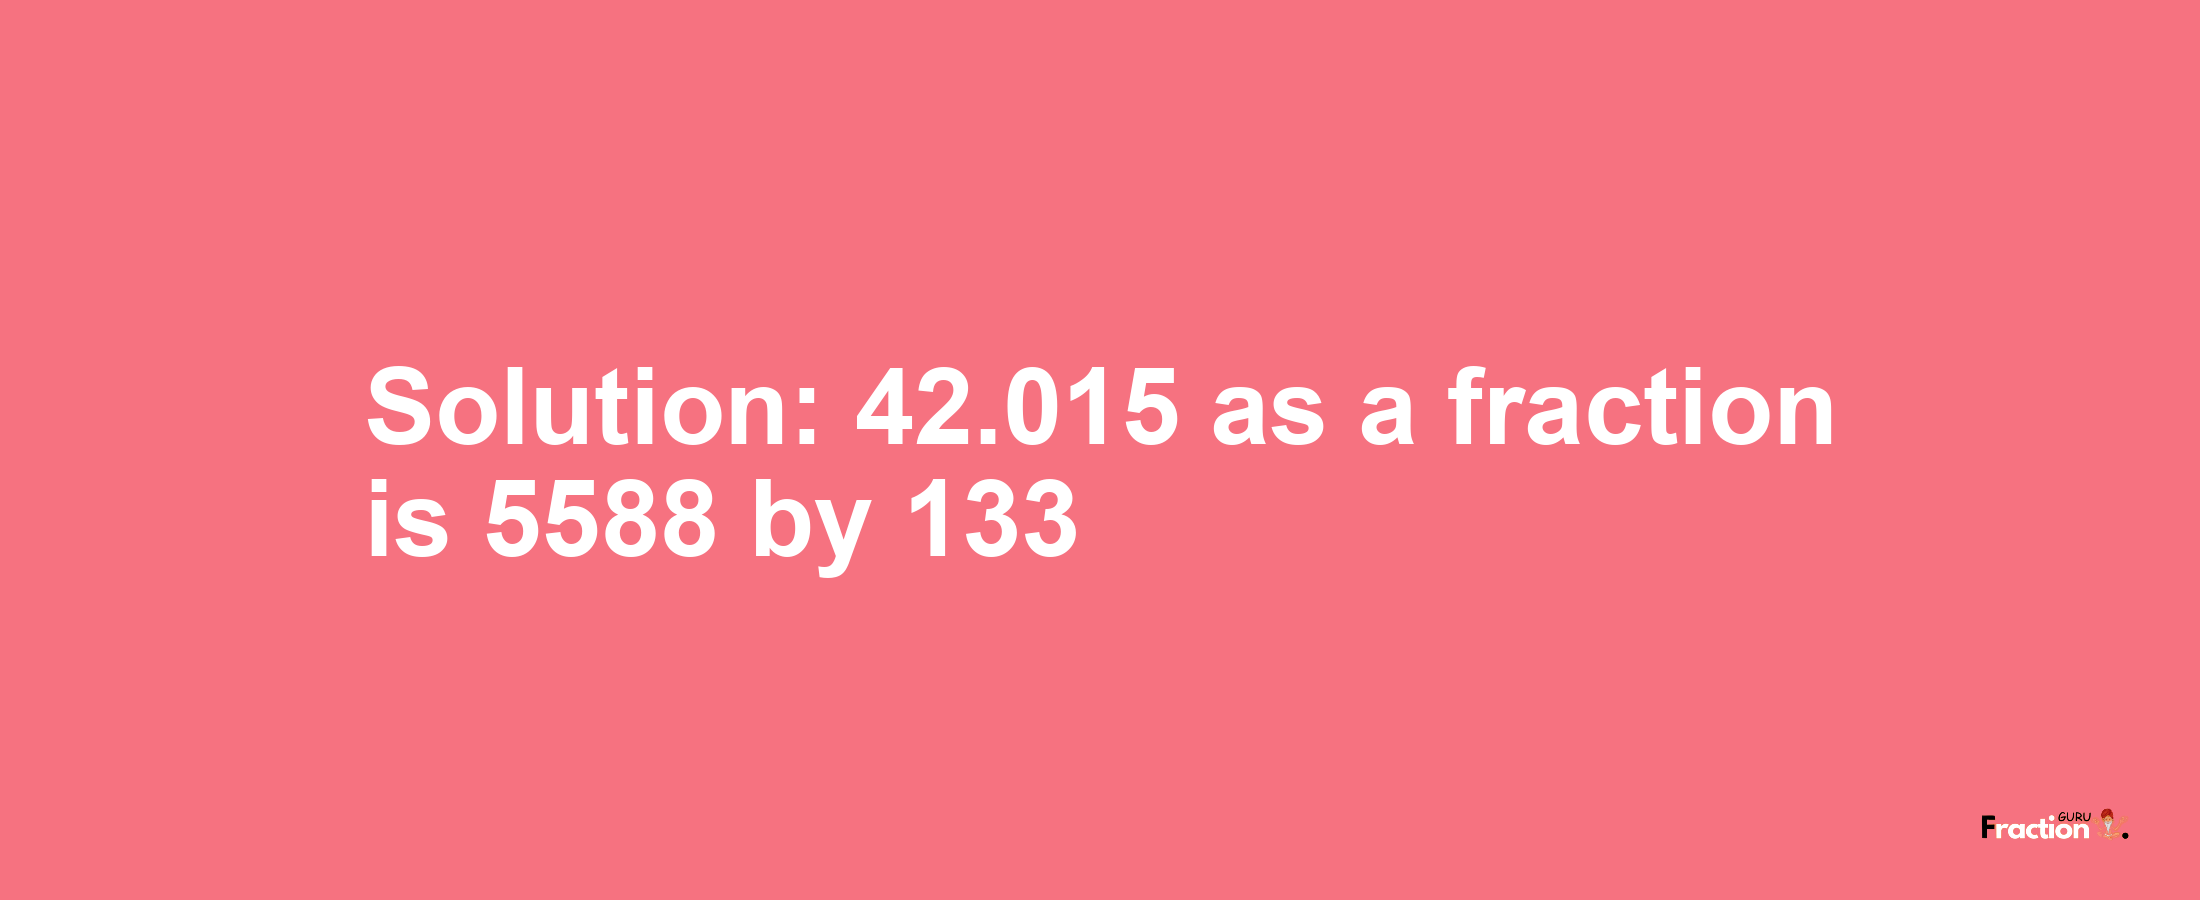 Solution:42.015 as a fraction is 5588/133